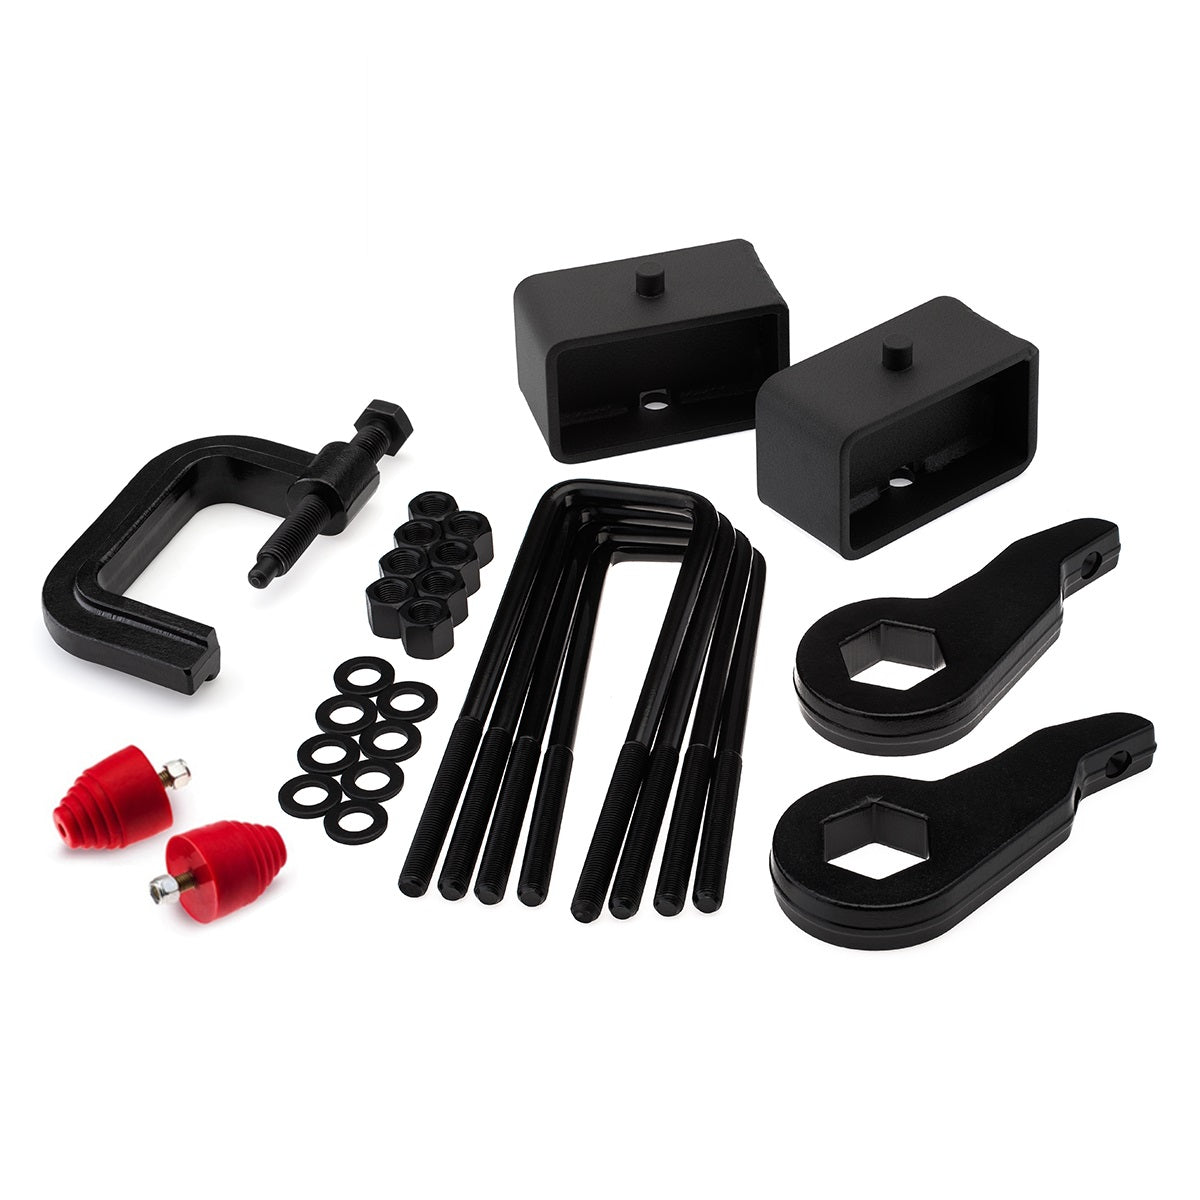 1997-2012 Ford Ranger Full Lift Kit with Torsion Key Unloading/Removal Tool and Bump Stops